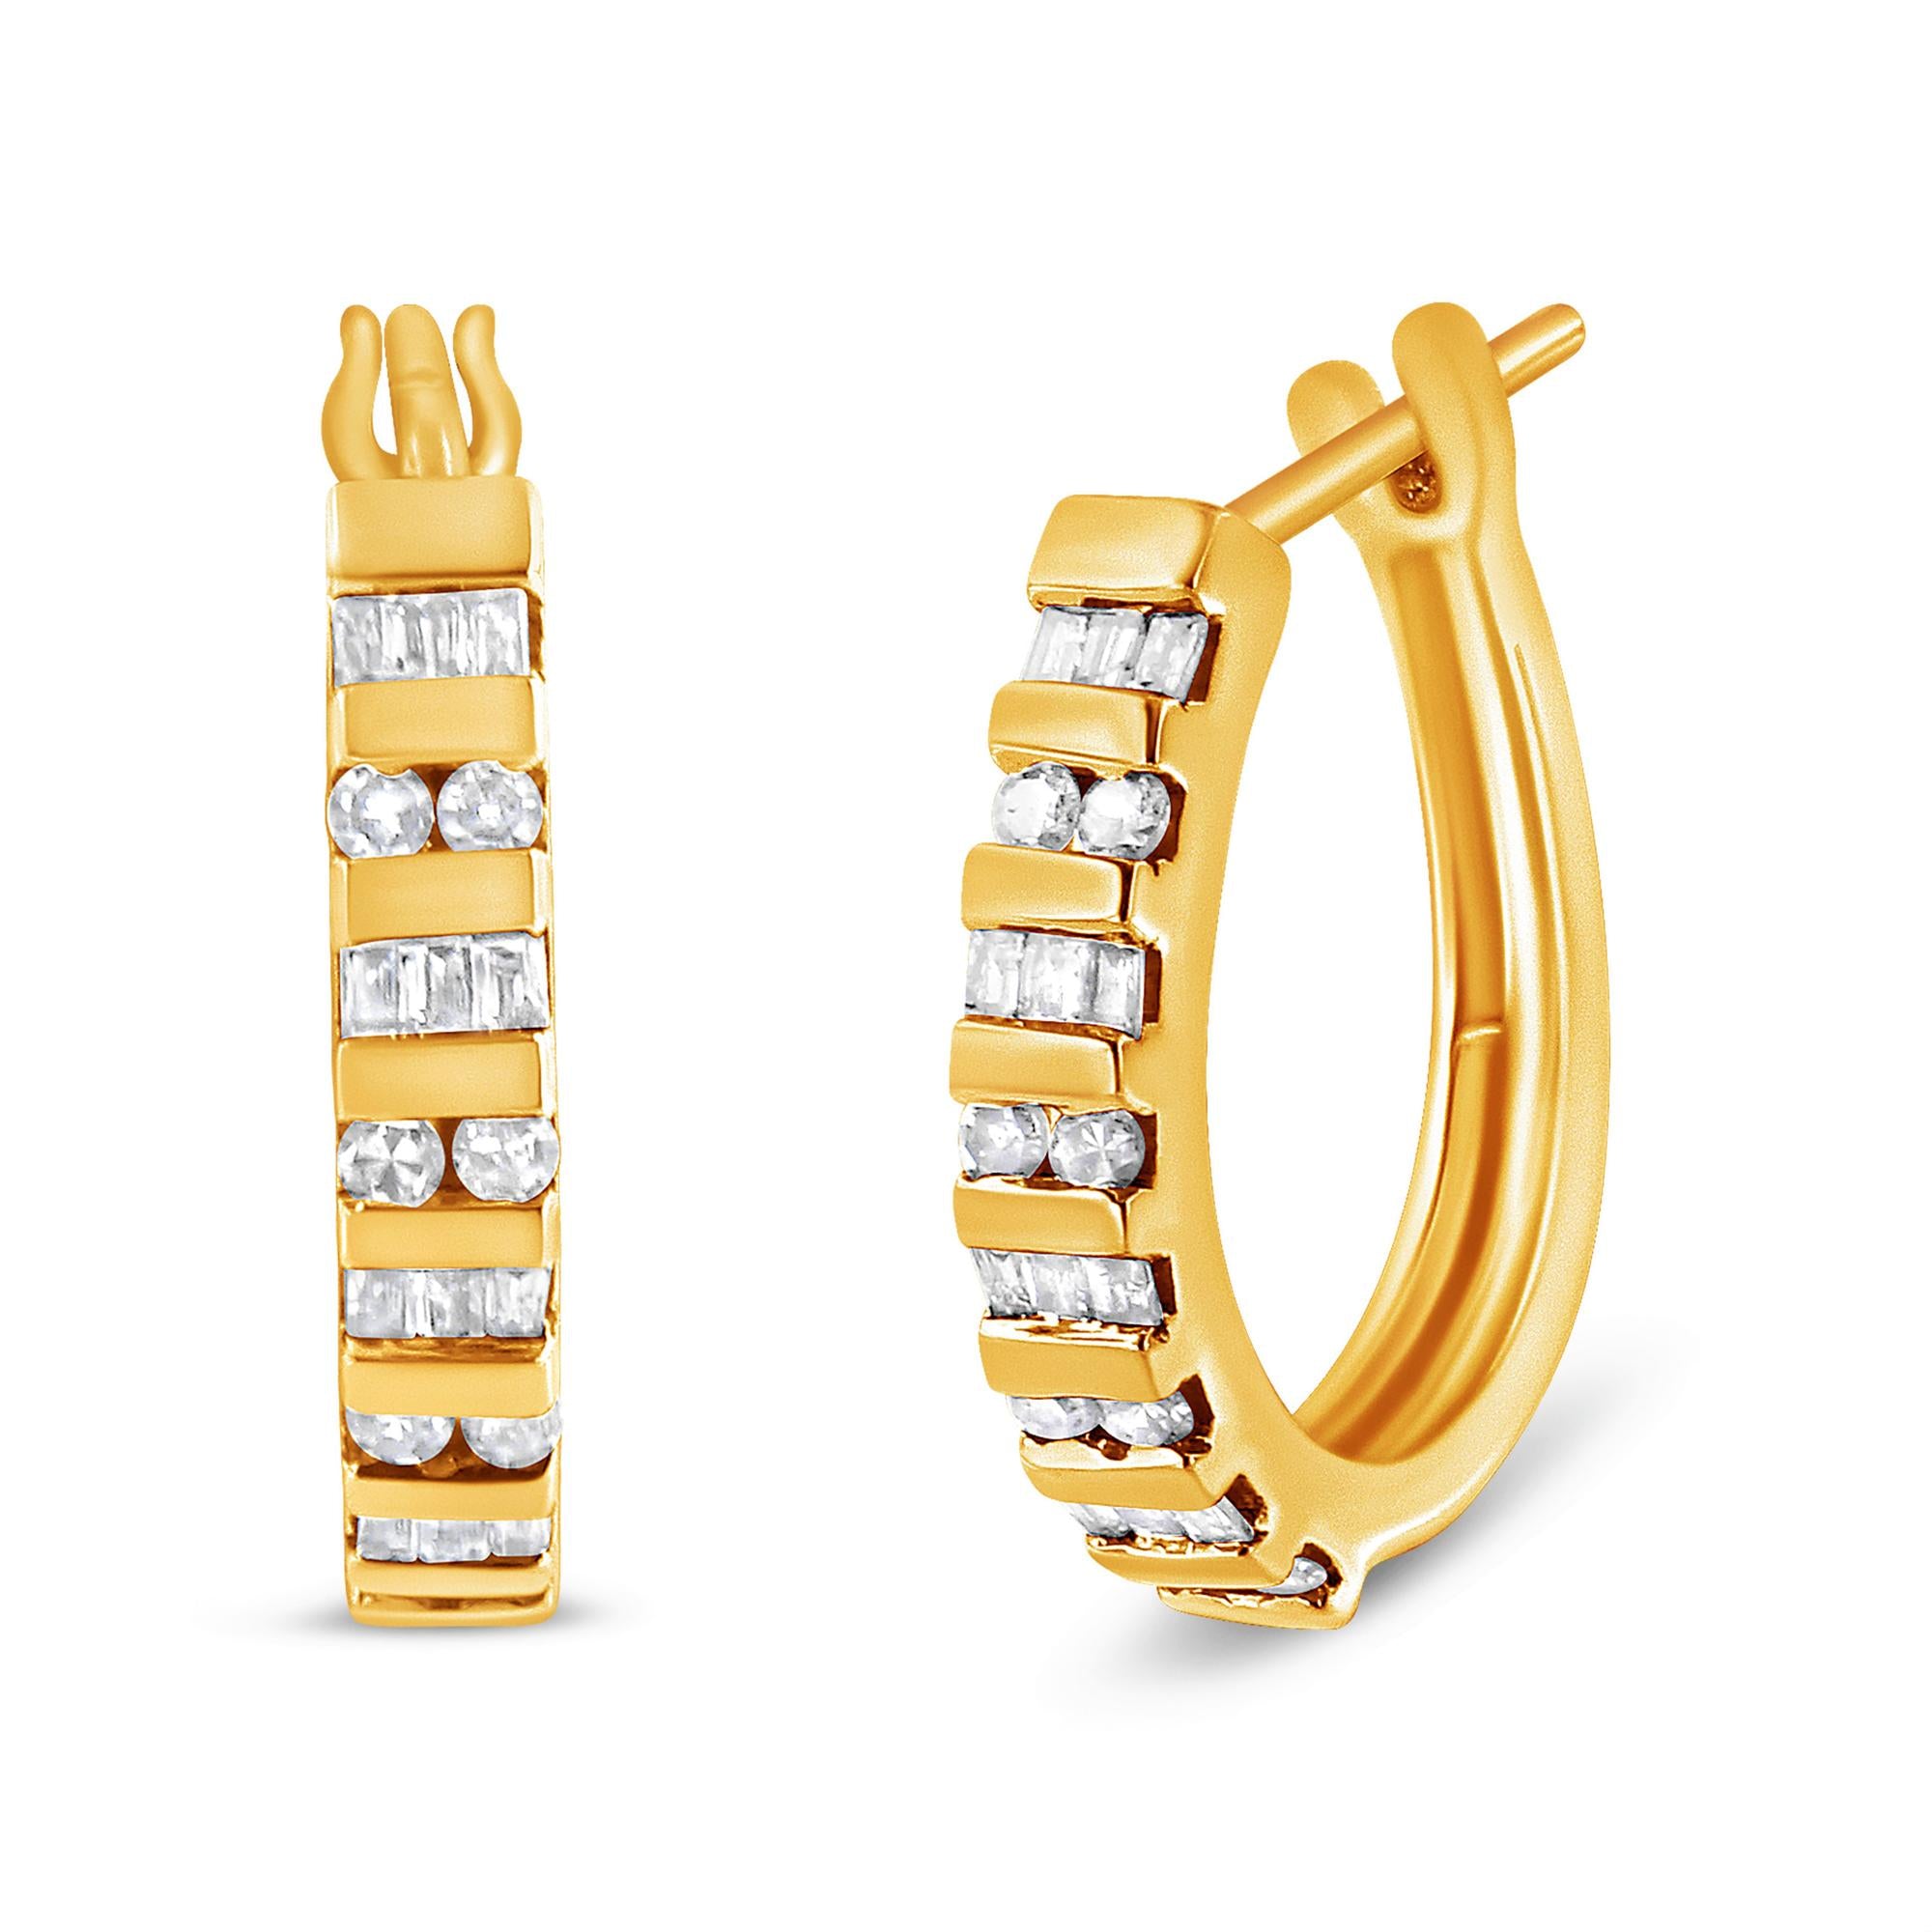 10K Gold Round and Baguette-Cut Diamond Hoop Earrings (I-J Color, I2-I3 Clarity)